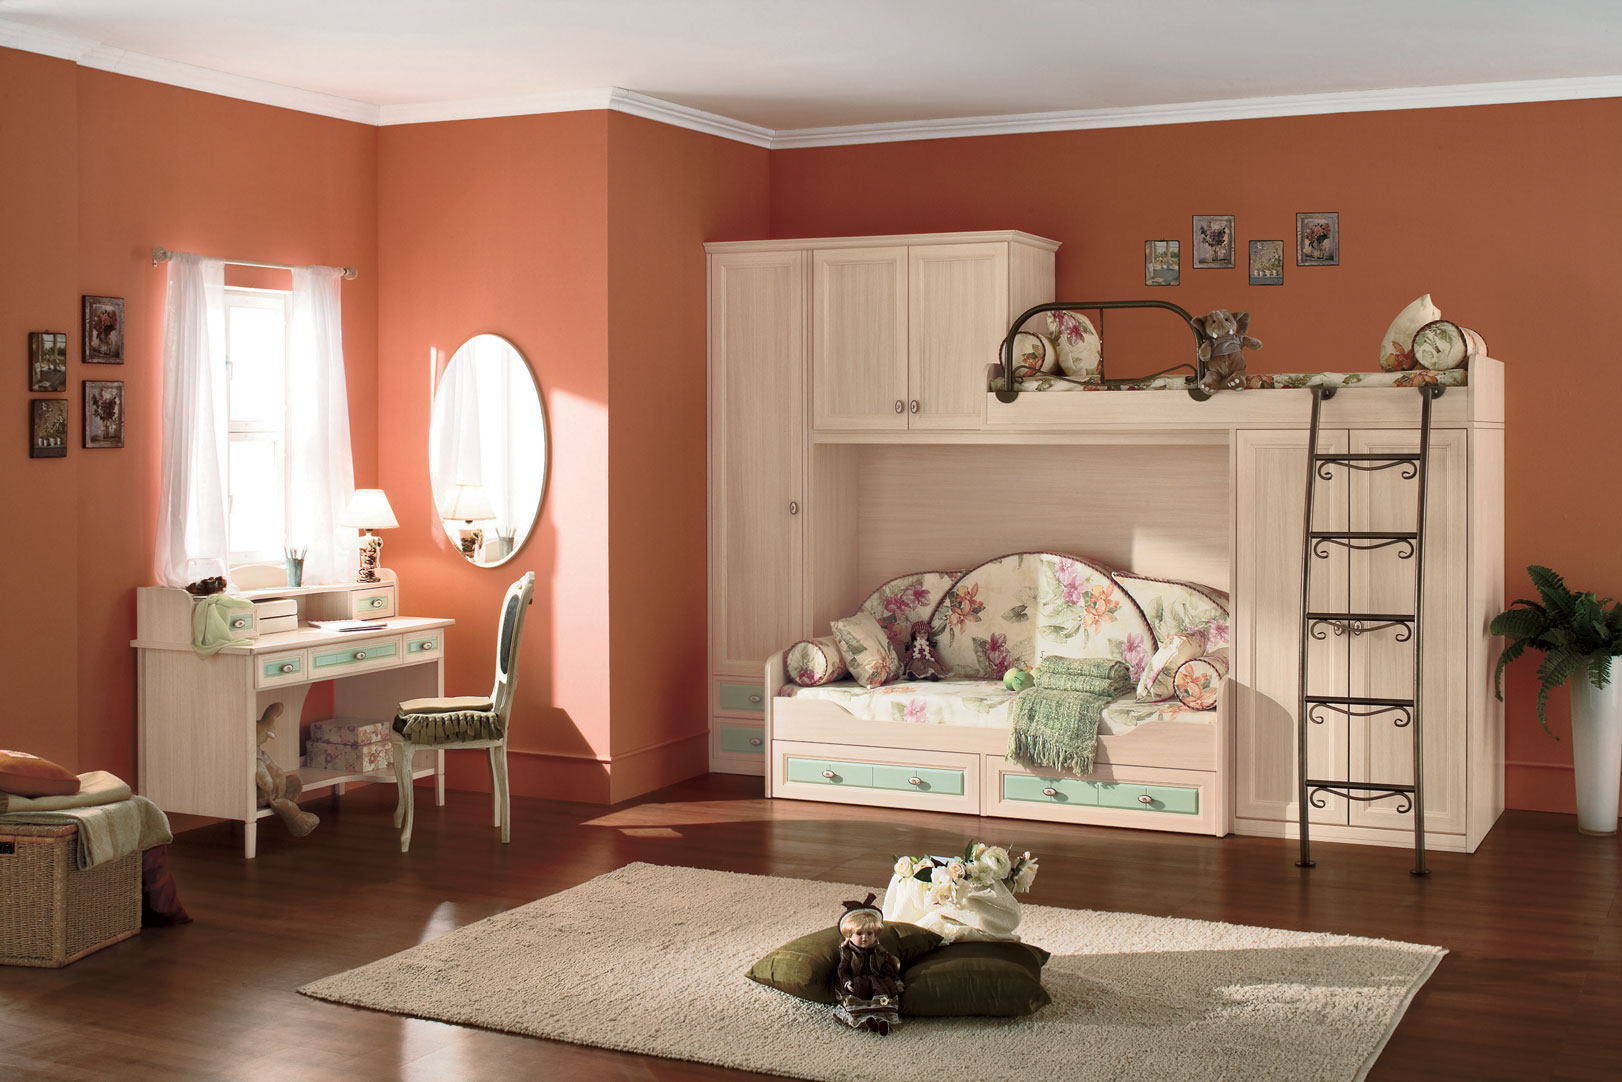 promote: Kid’s Rooms From Russian Maker:Akossta
